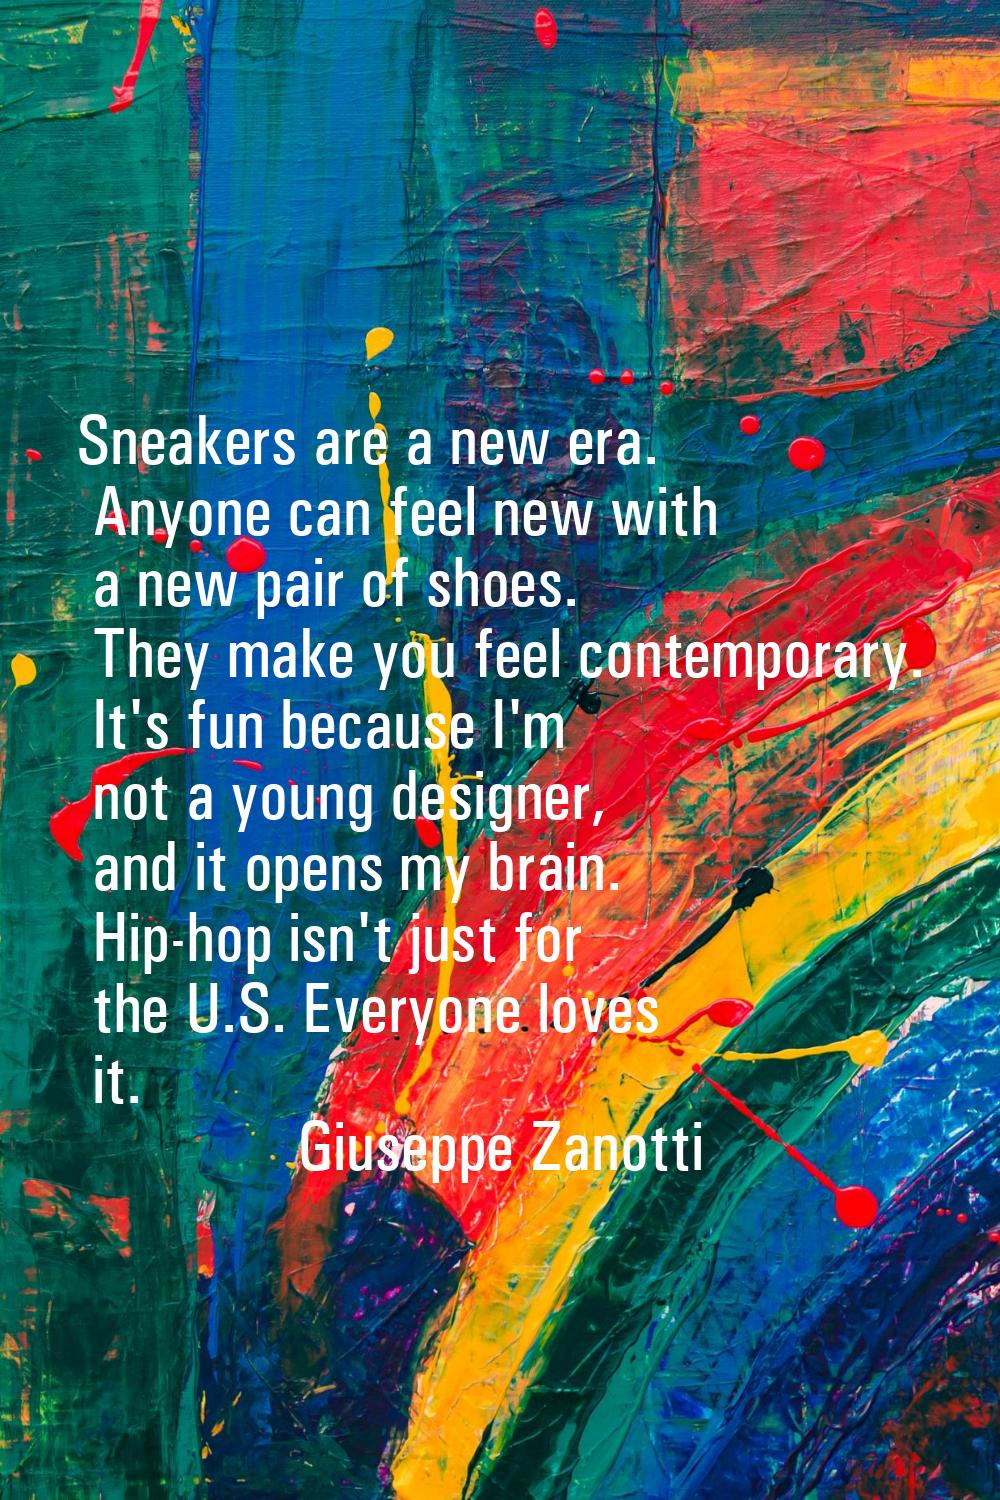 Sneakers are a new era. Anyone can feel new with a new pair of shoes. They make you feel contempora